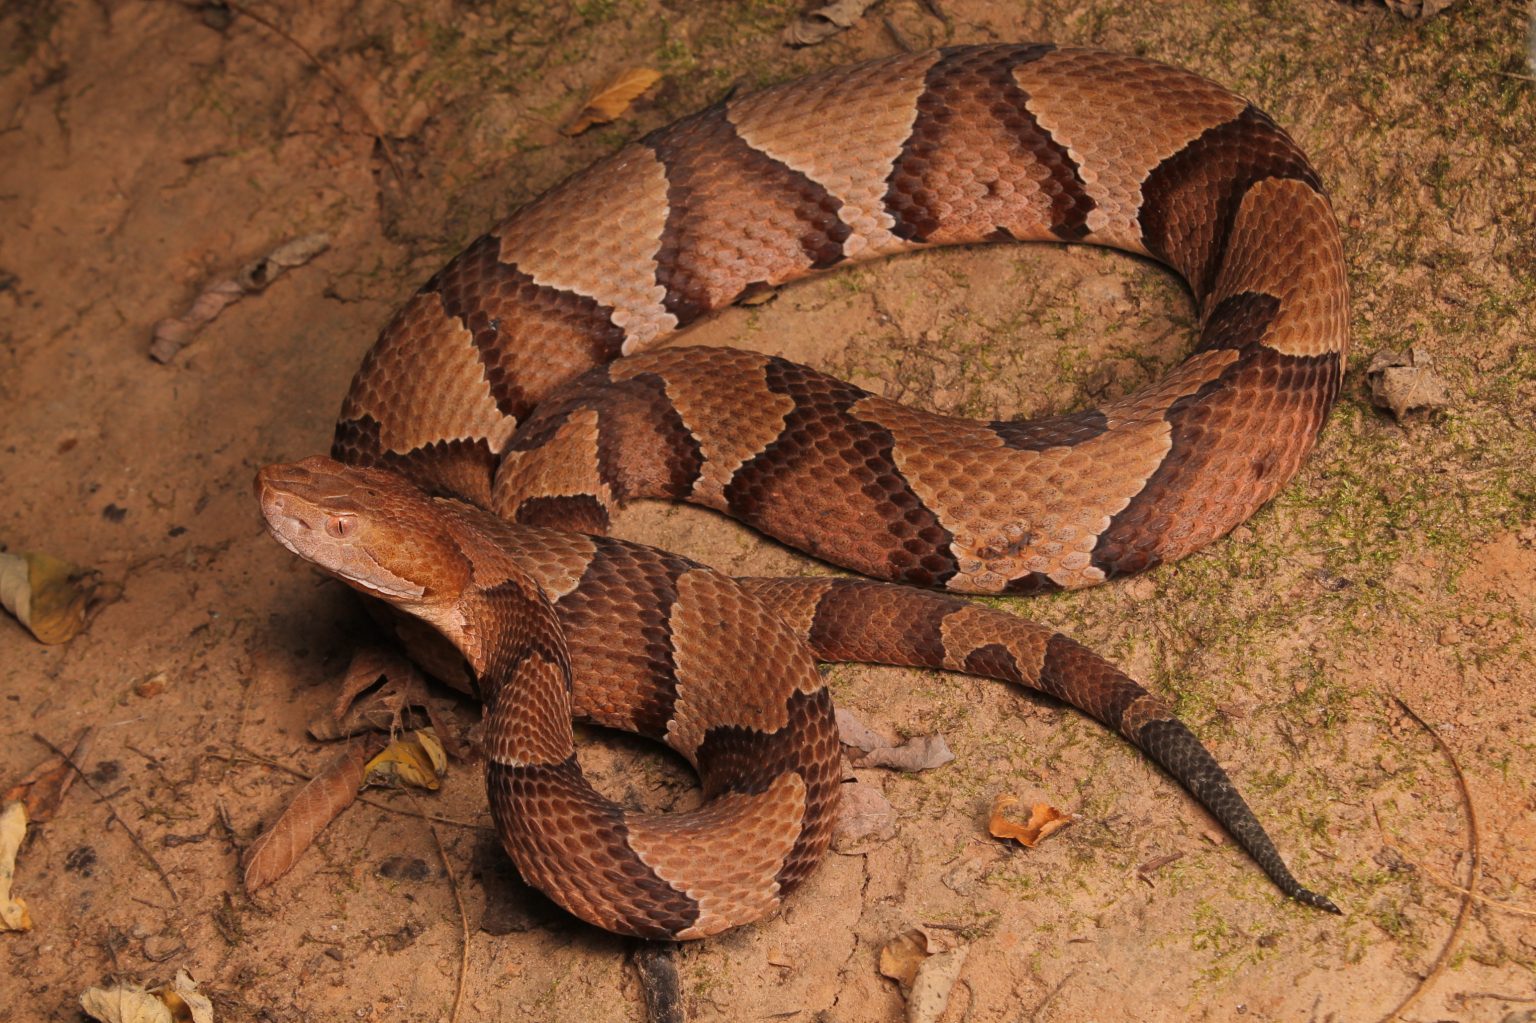 Can You Survive a Bite from a Copperhead Snake Without Treatment? 